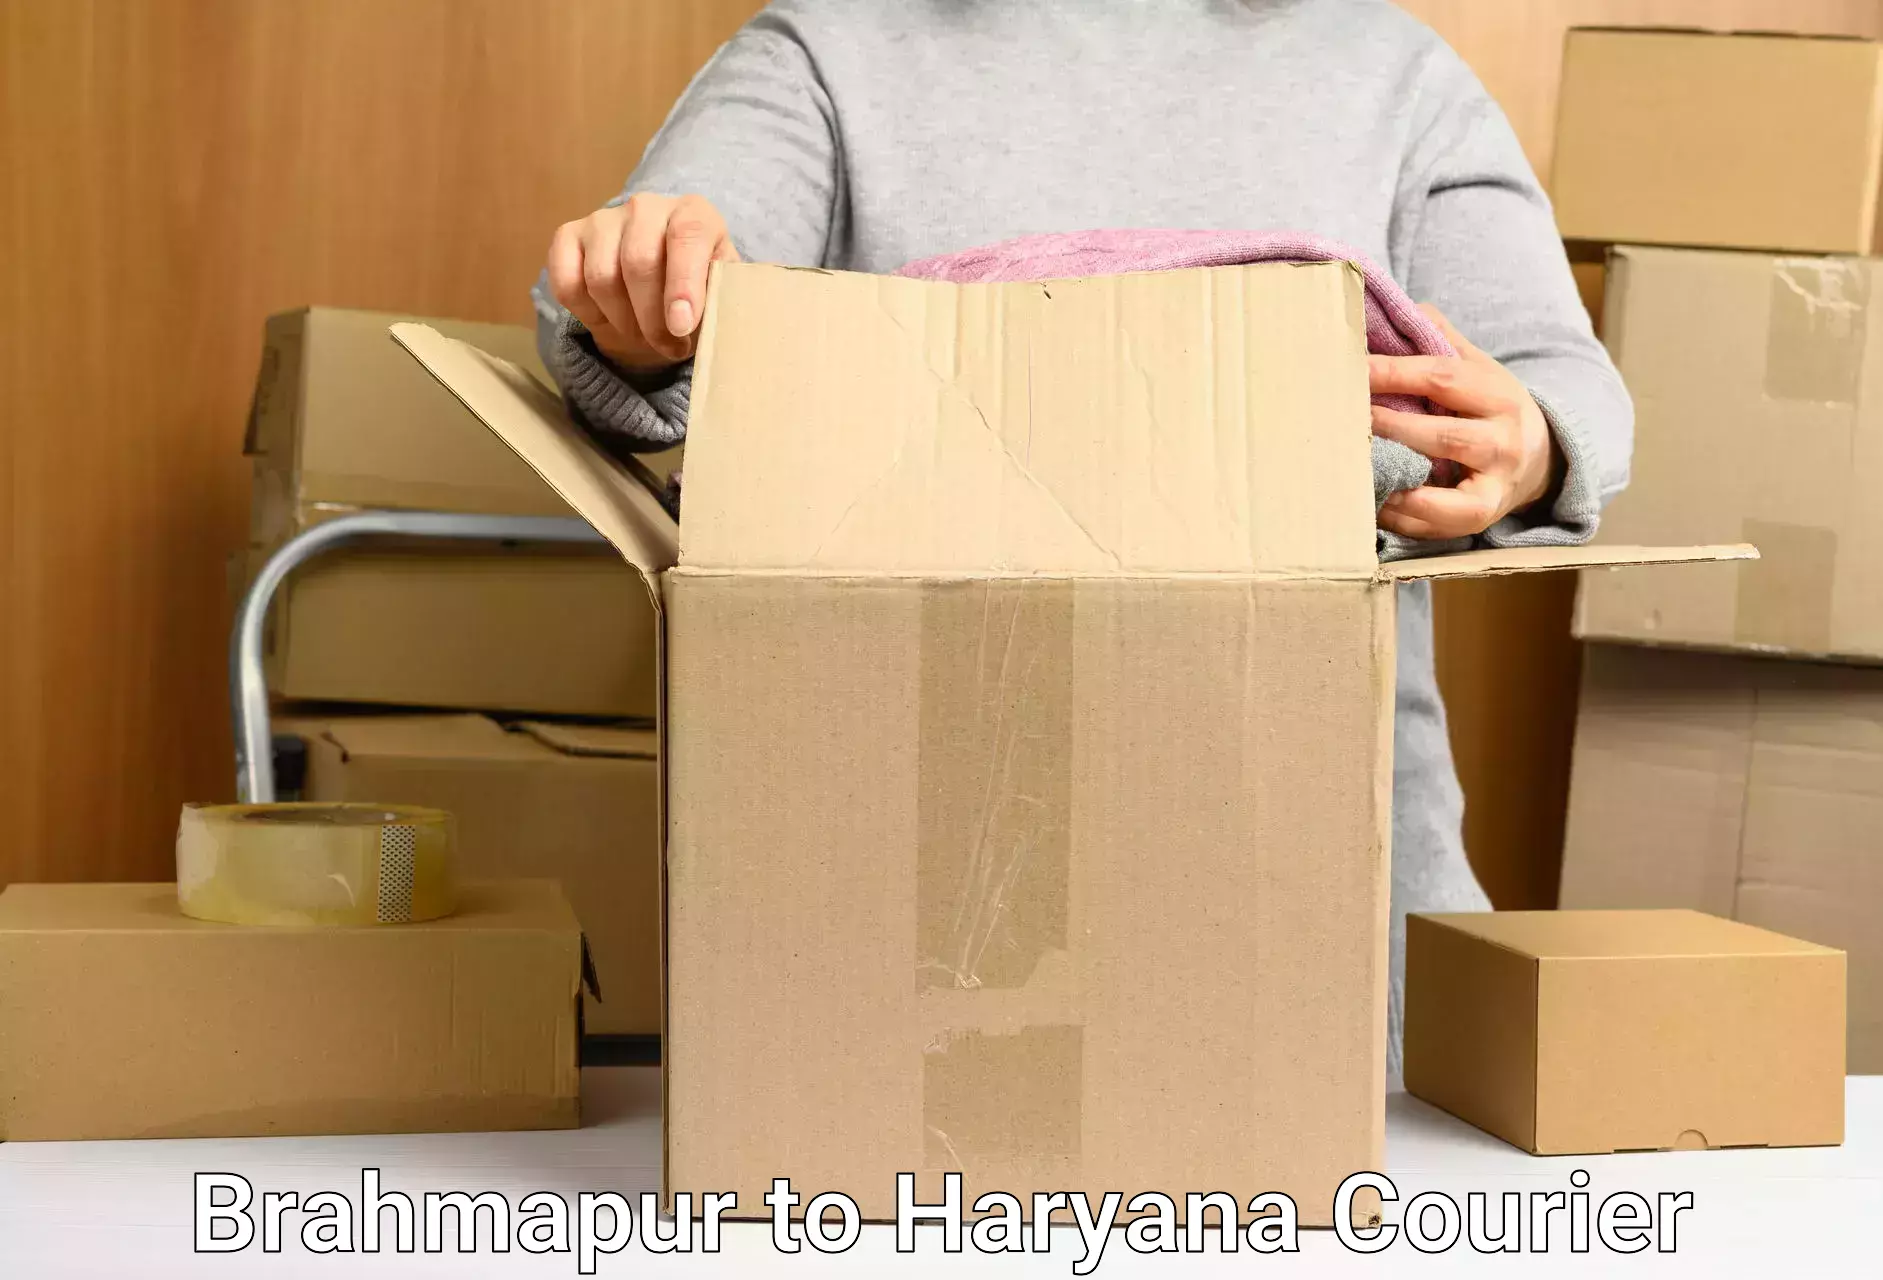 On-call courier service Brahmapur to Gurgaon